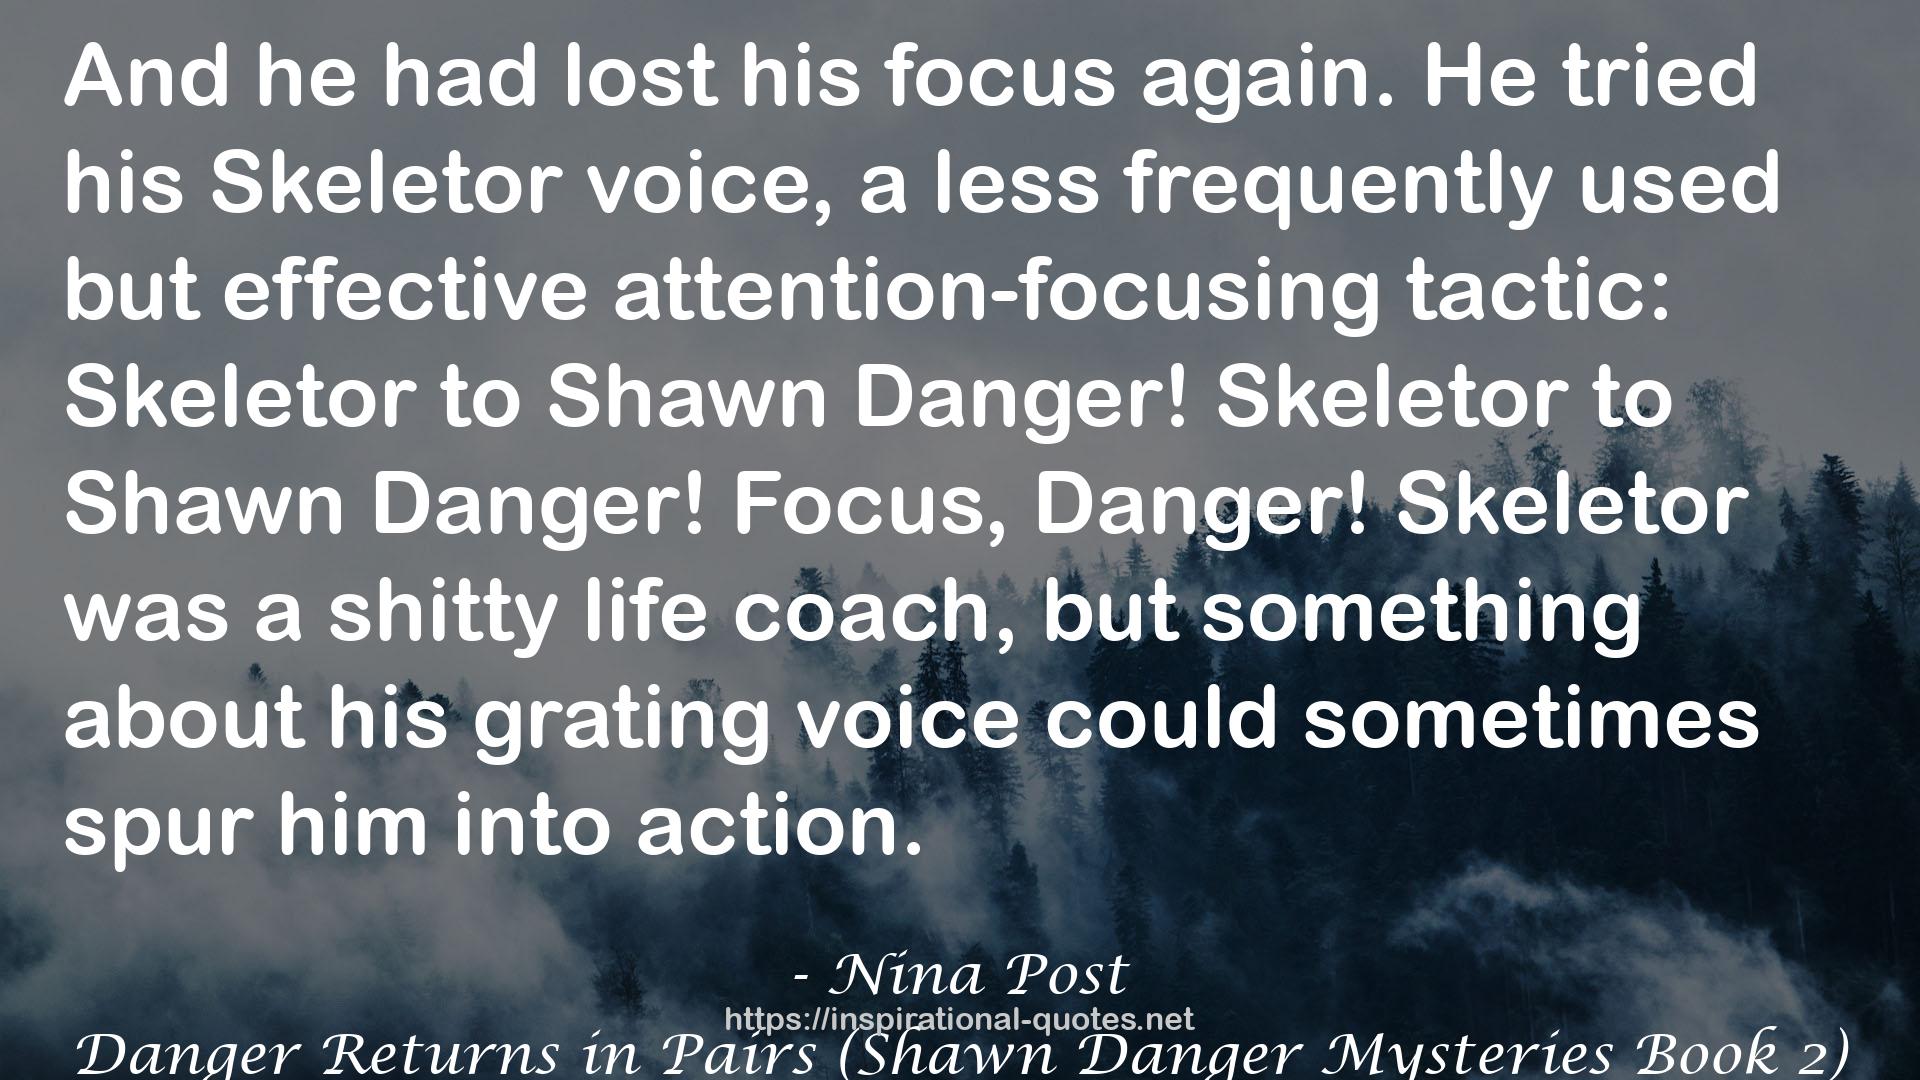 Danger Returns in Pairs (Shawn Danger Mysteries Book 2) QUOTES